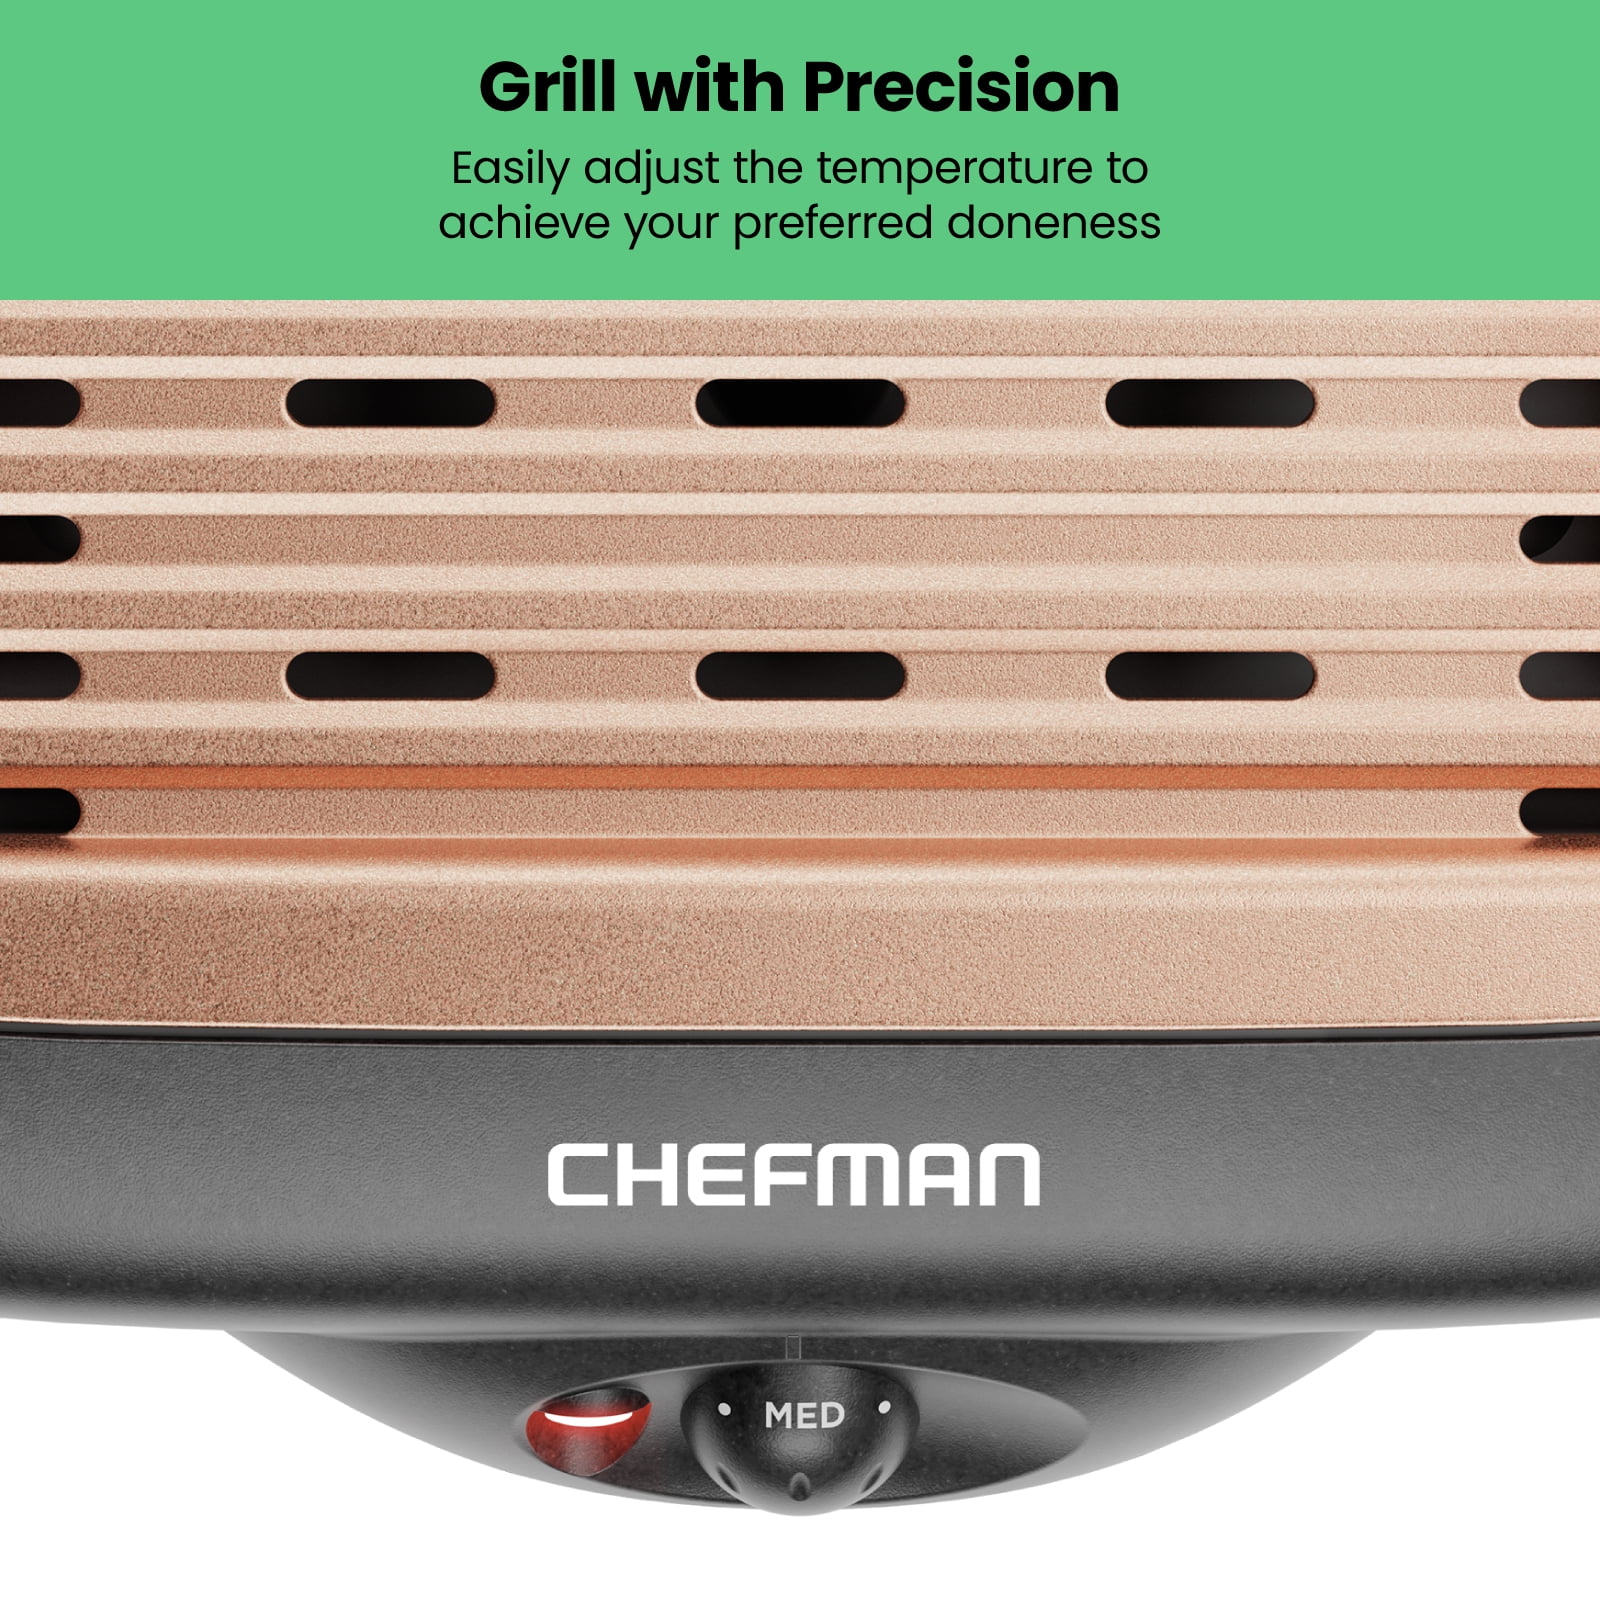 Chefman Electric Smokeless Indoor Grill with Nonstick Coating - Black, 15  in - Smith's Food and Drug